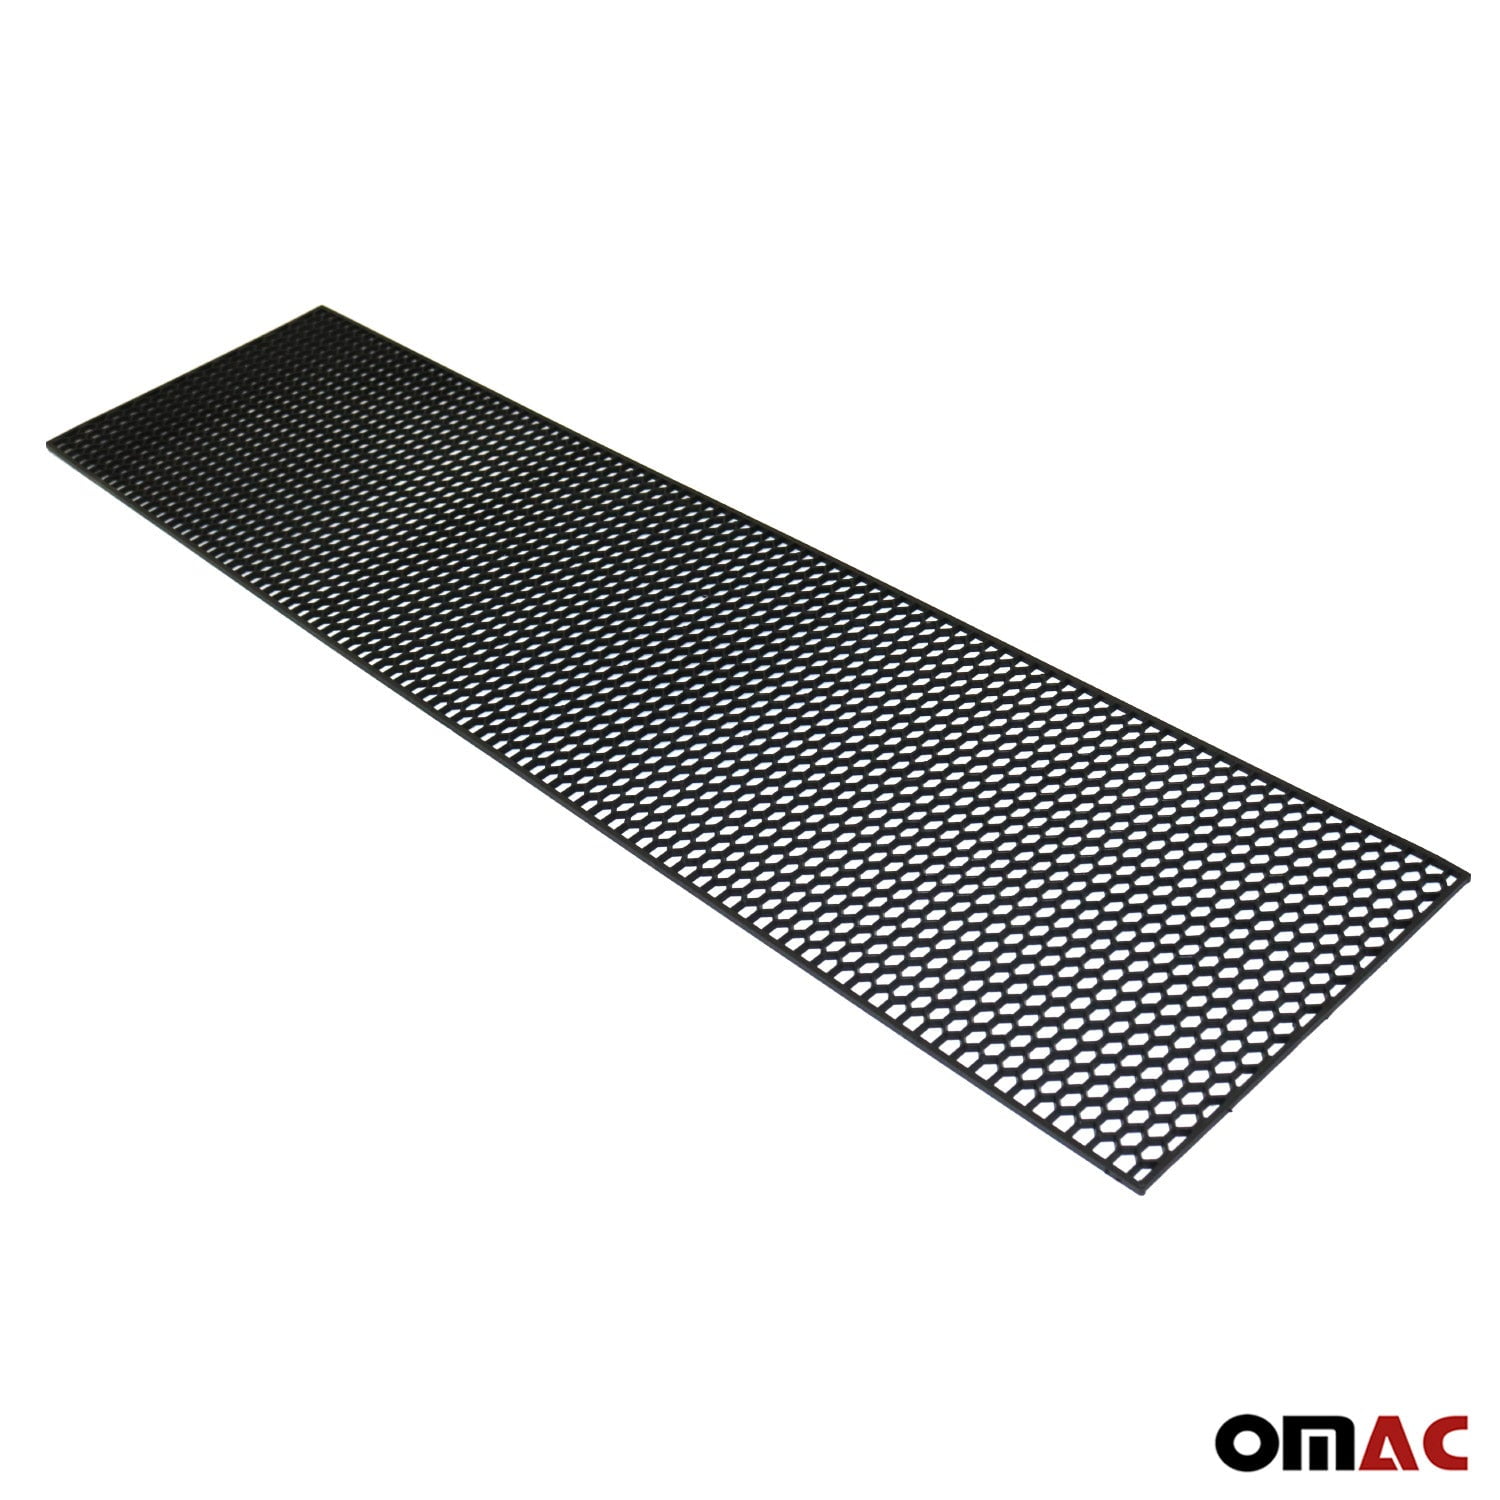 PP Honeycomb Mesh Sheet For All DIY Project on bumpers/ Grille..Etc un - Mr  Bodykits